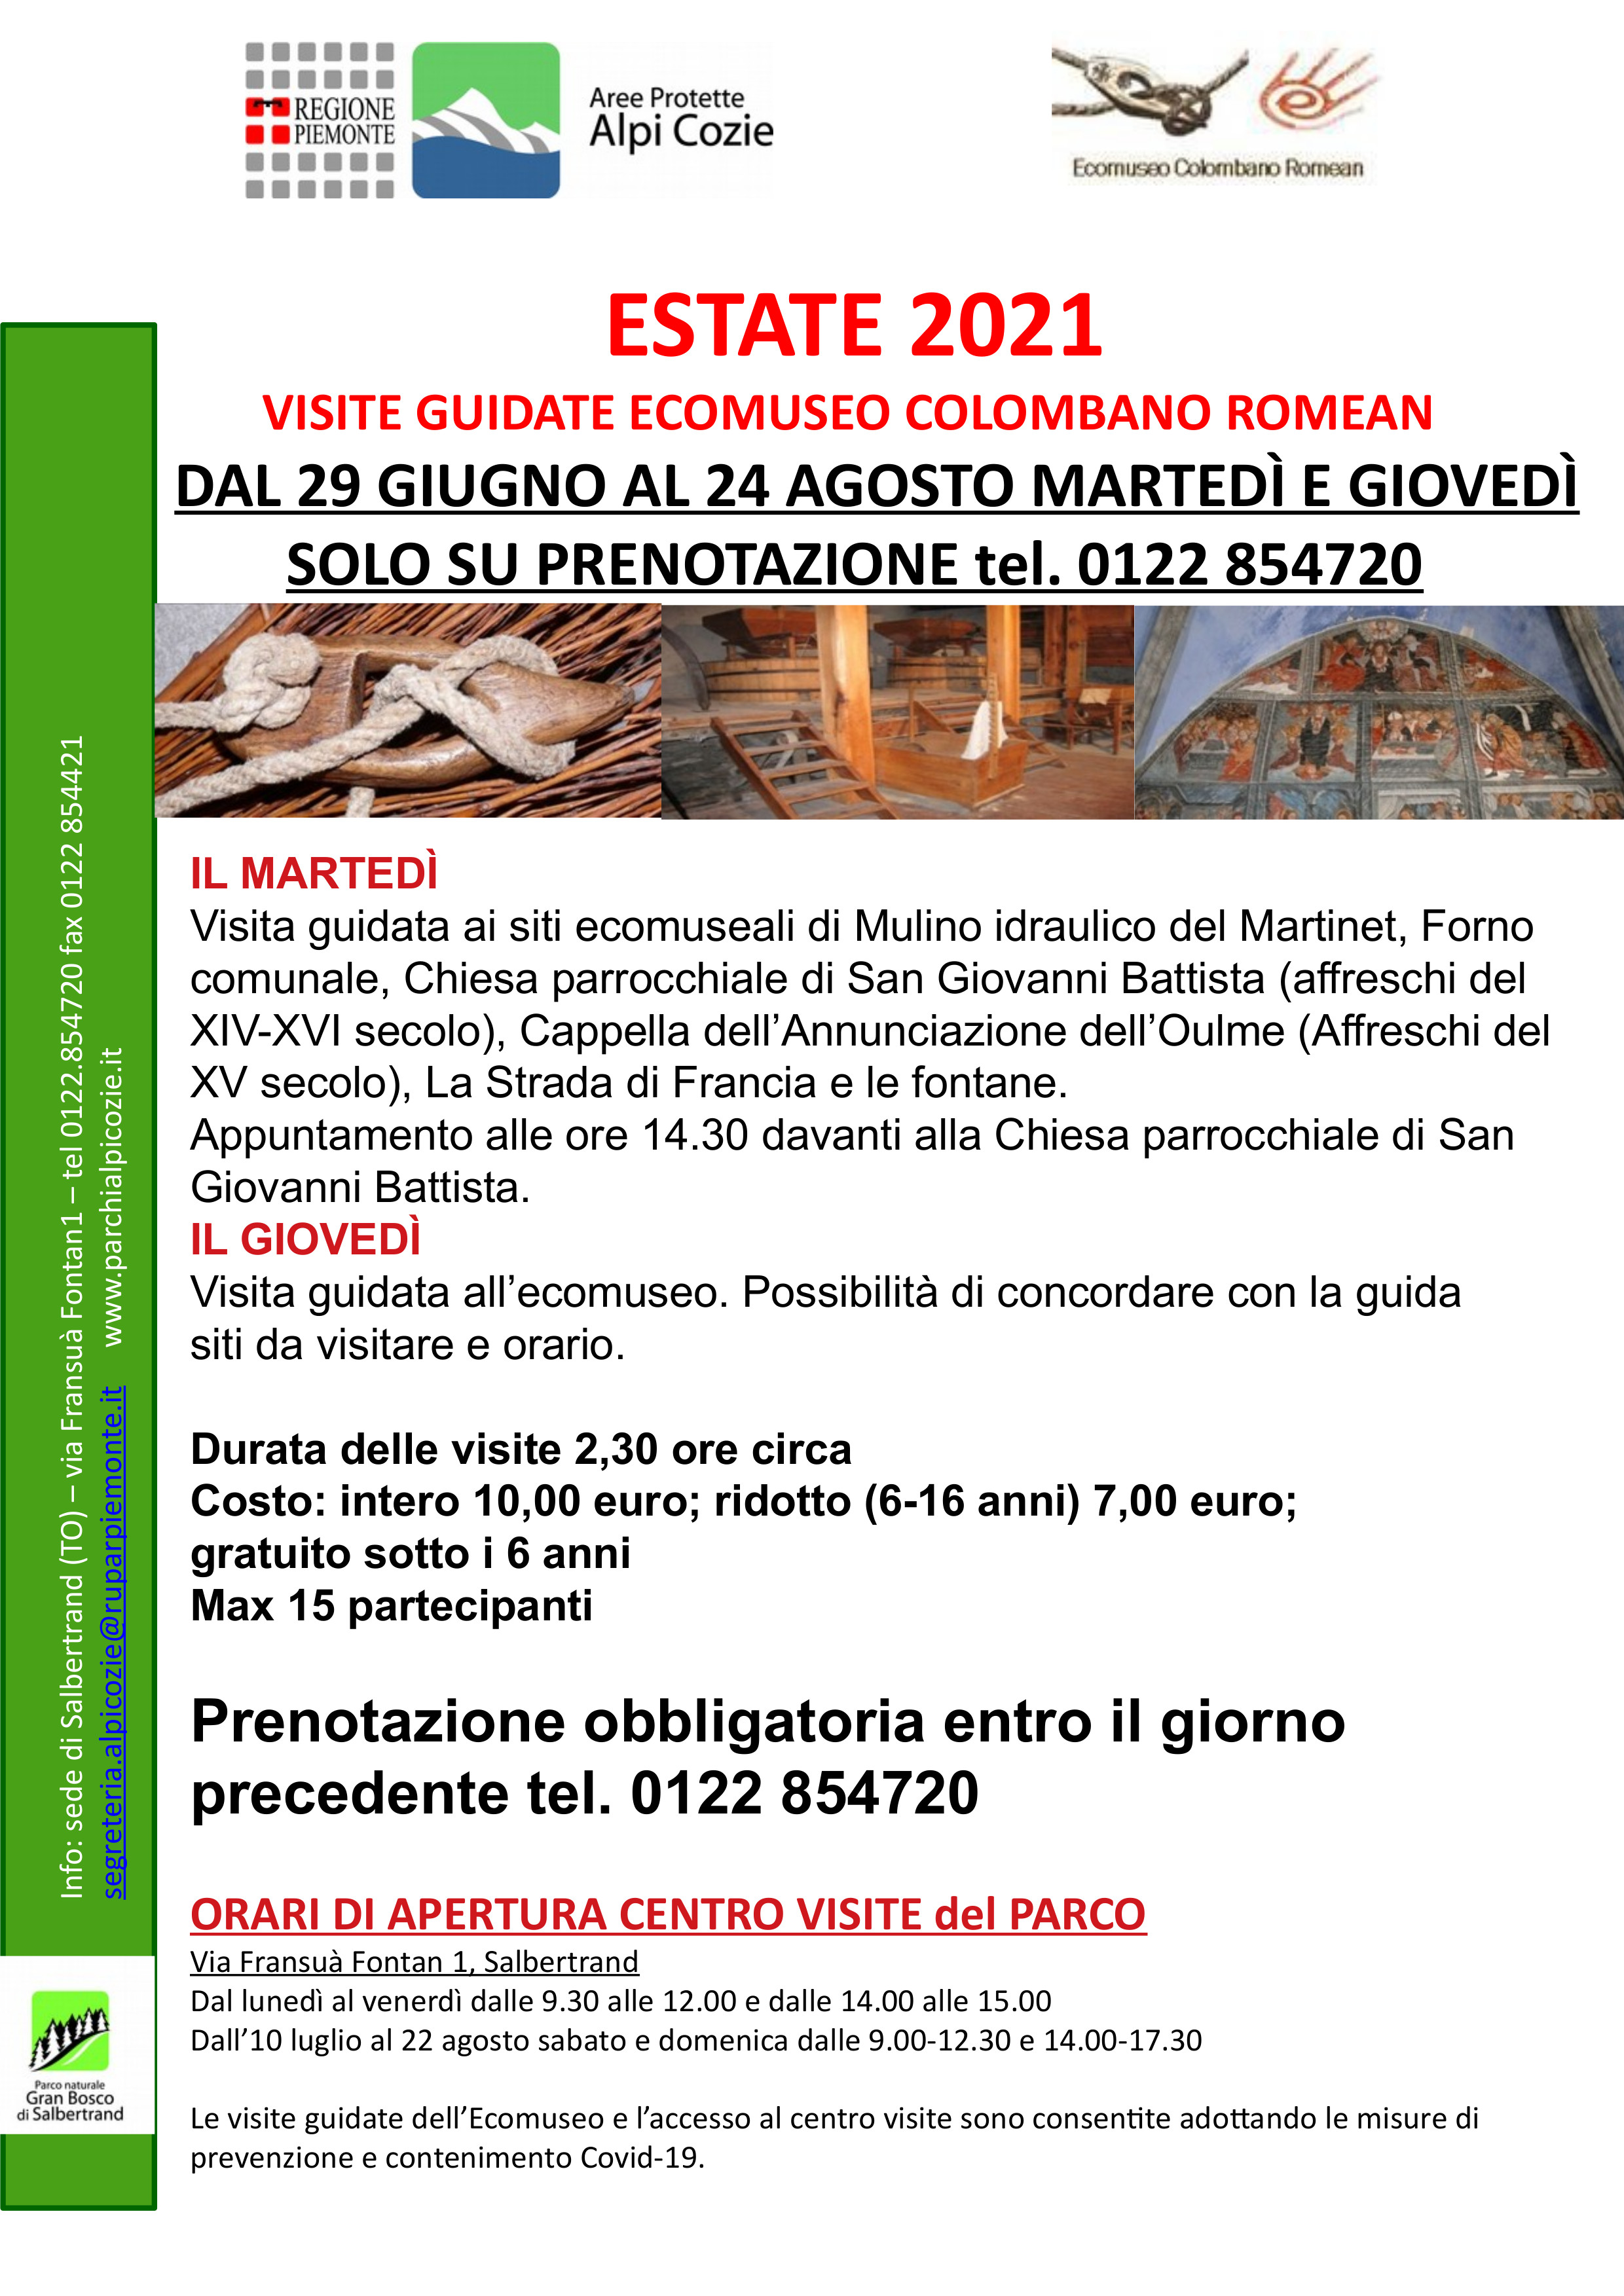 Visite guidate all'Ecomuseo Colombano Romean